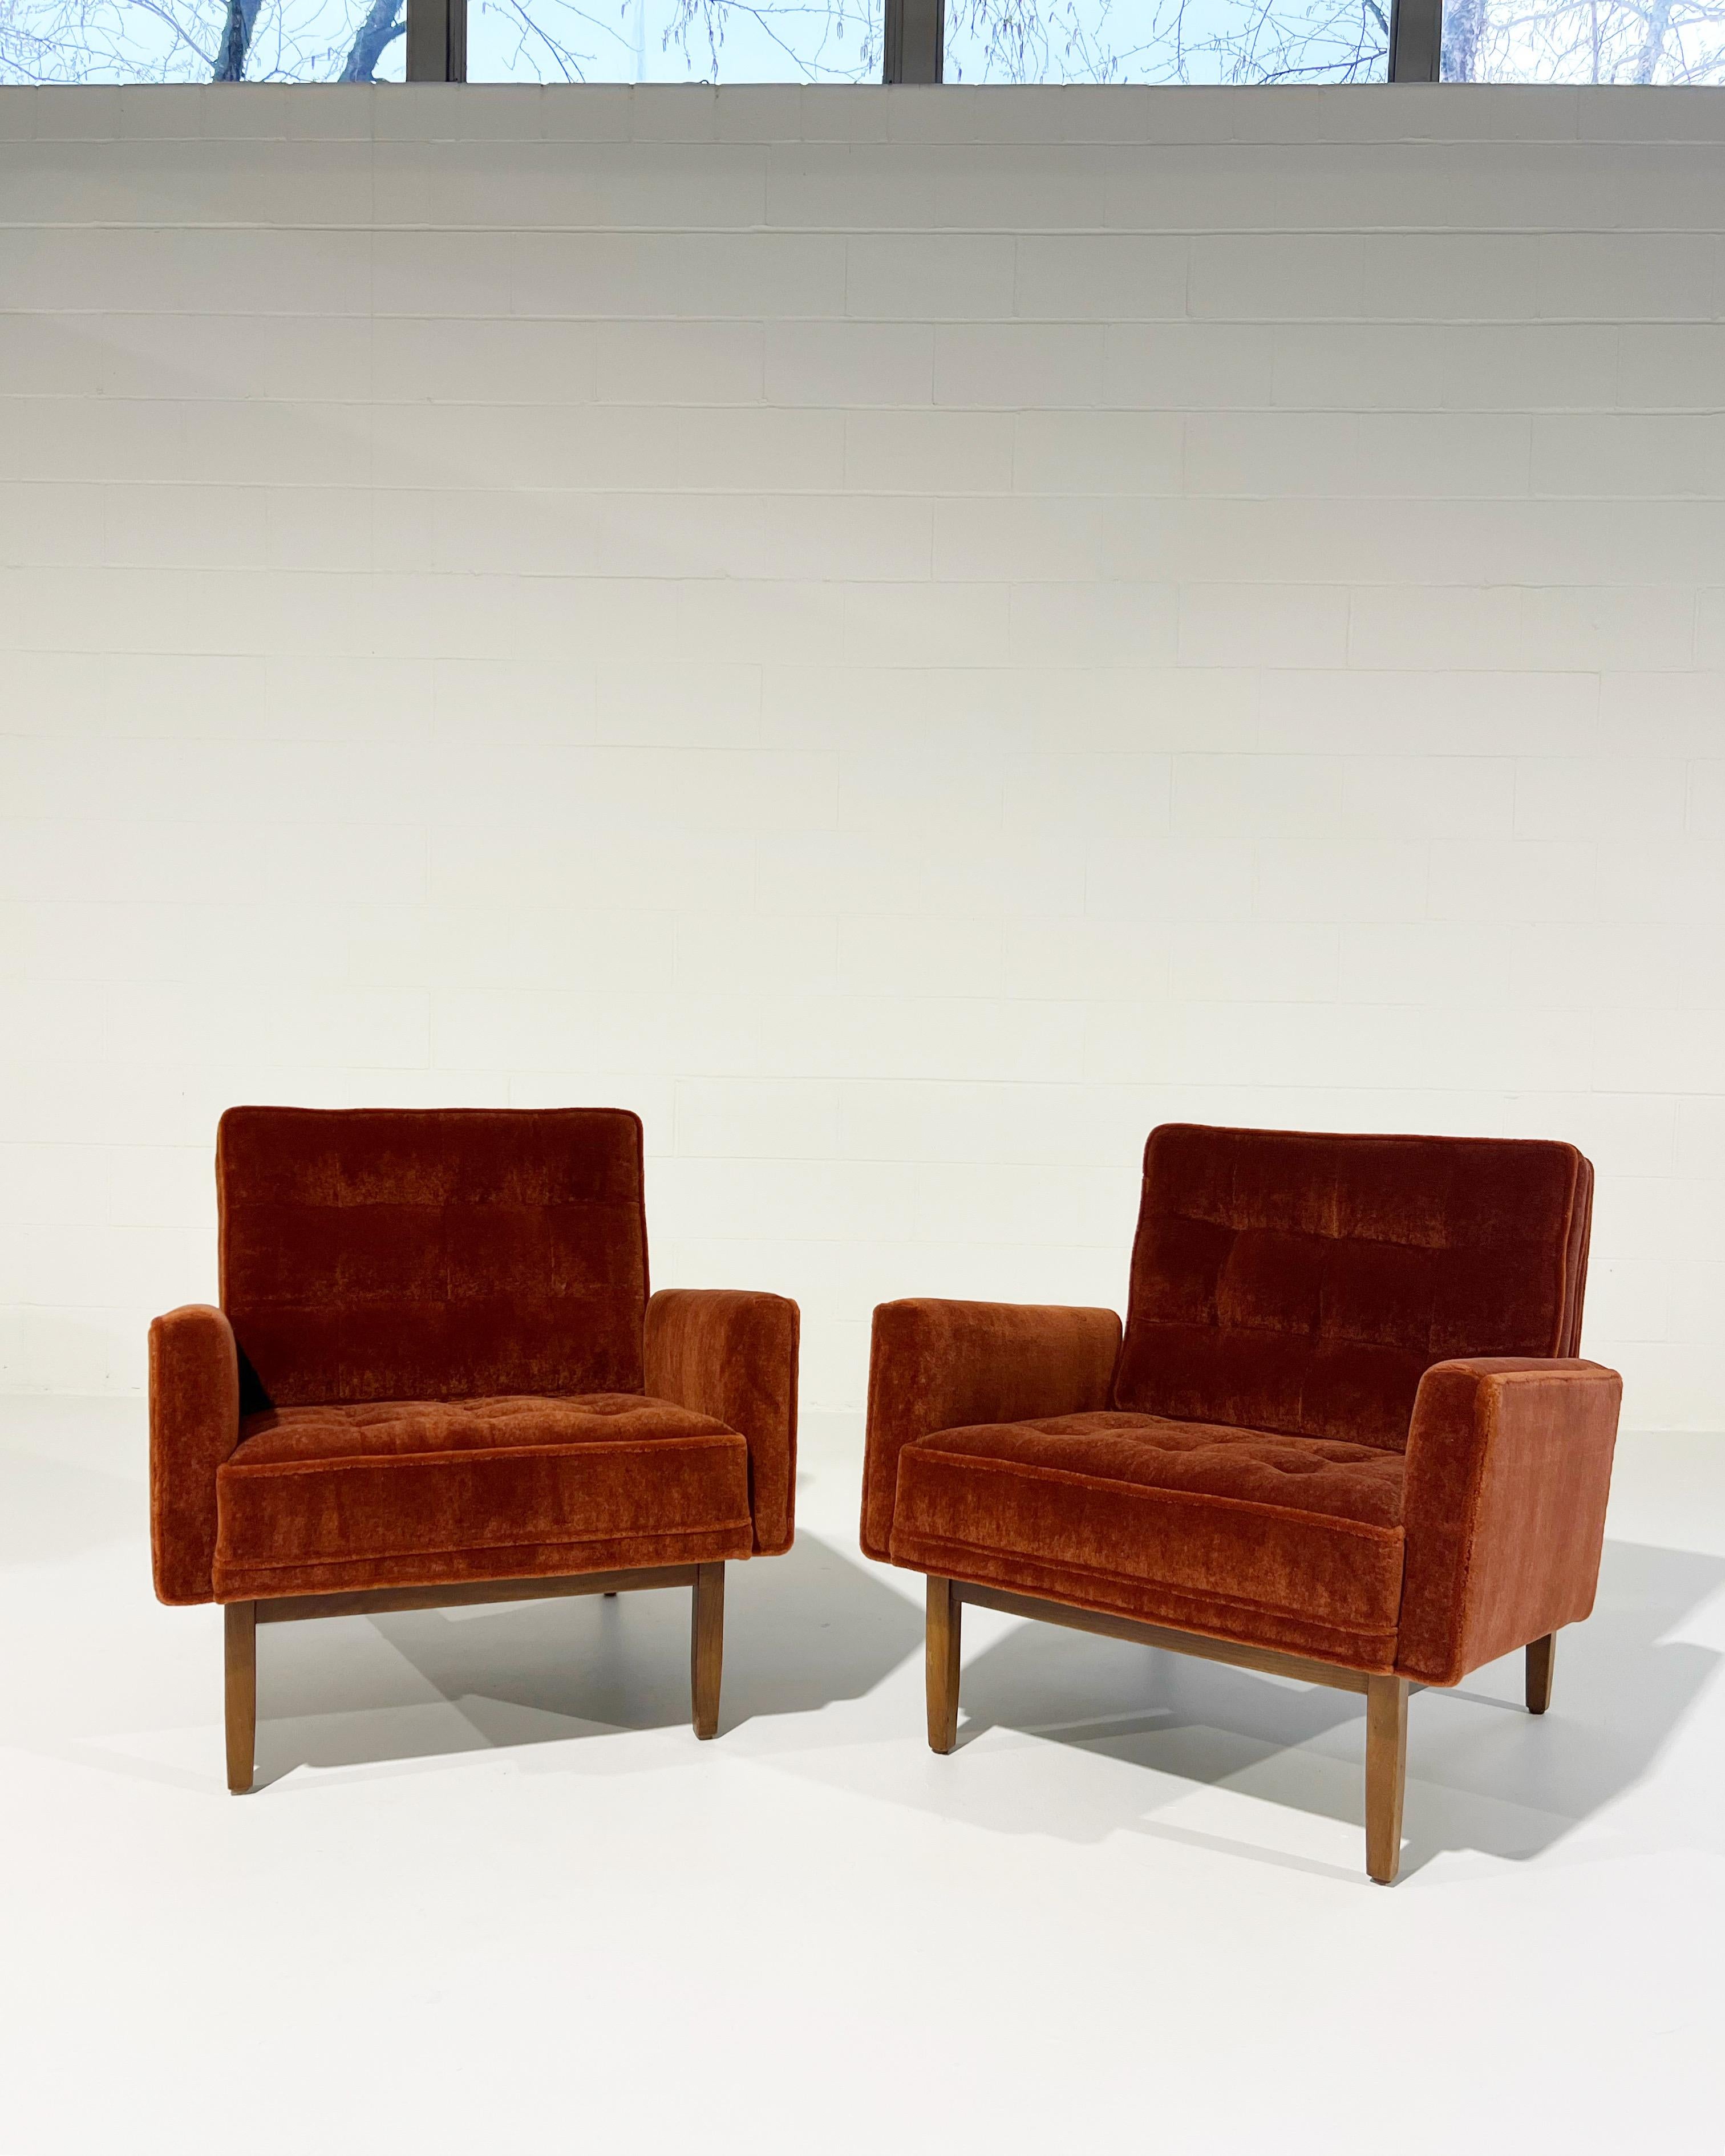 Vintage Restored Florence Knoll Armchairs in Pierre Frey Teddy Mohair For Sale 8